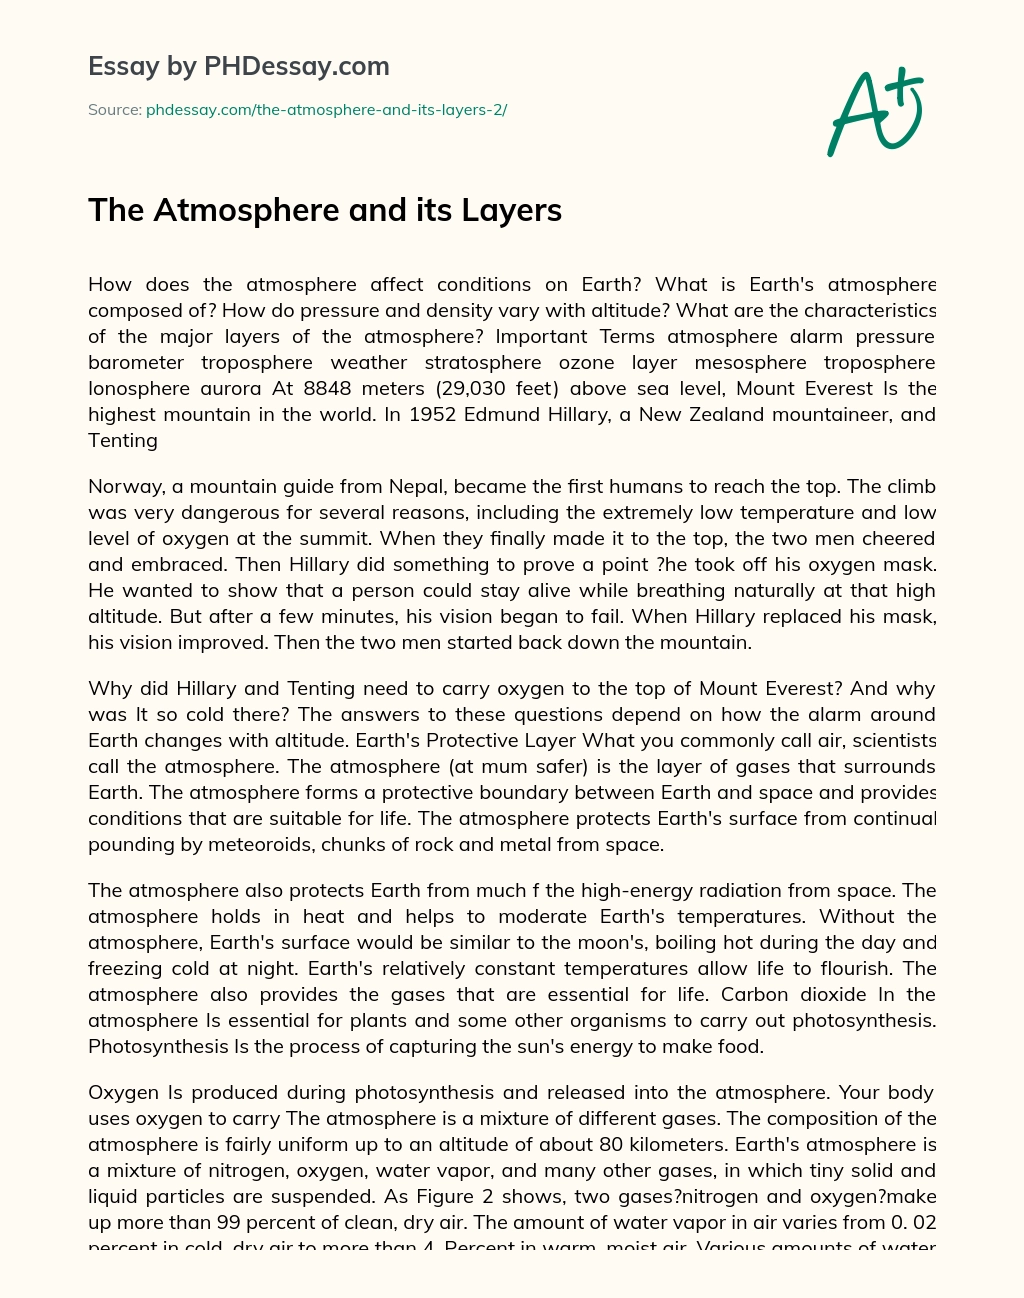 The Atmosphere and its Layers essay